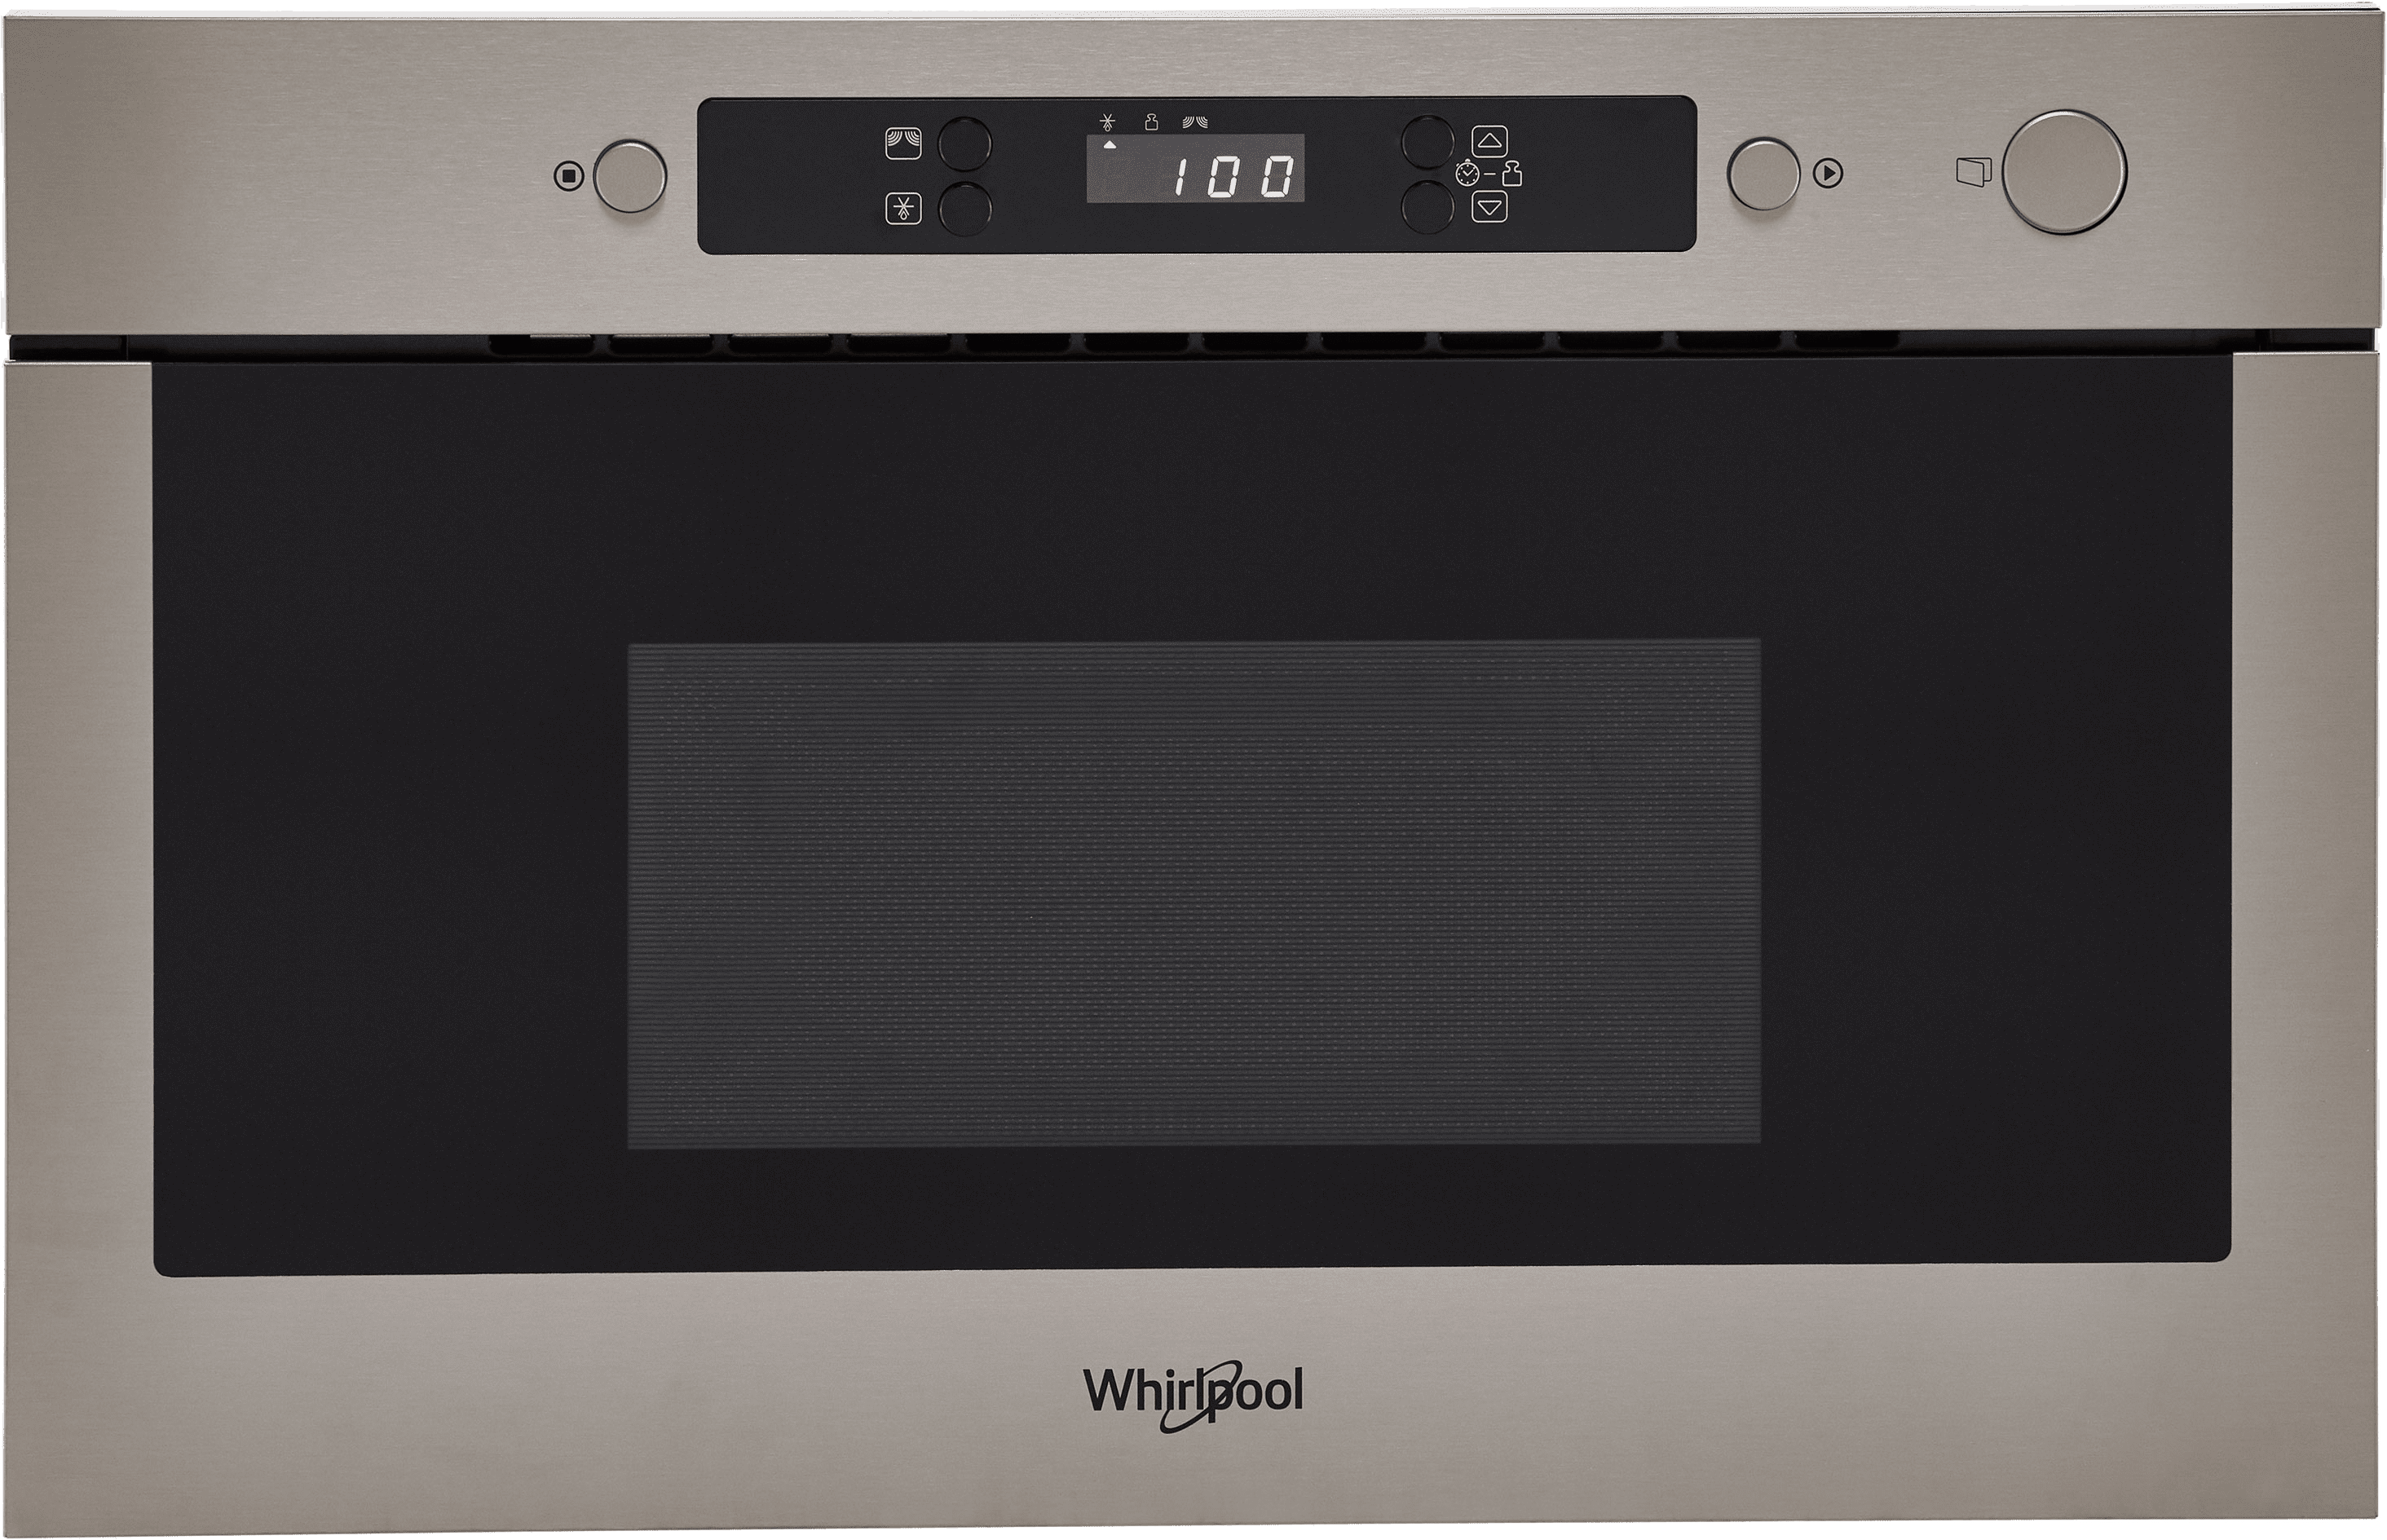 Whirlpool AMW423/IX 38cm tall, 60cm wide, Built In Compact Microwave - Stainless Steel, Stainless Steel